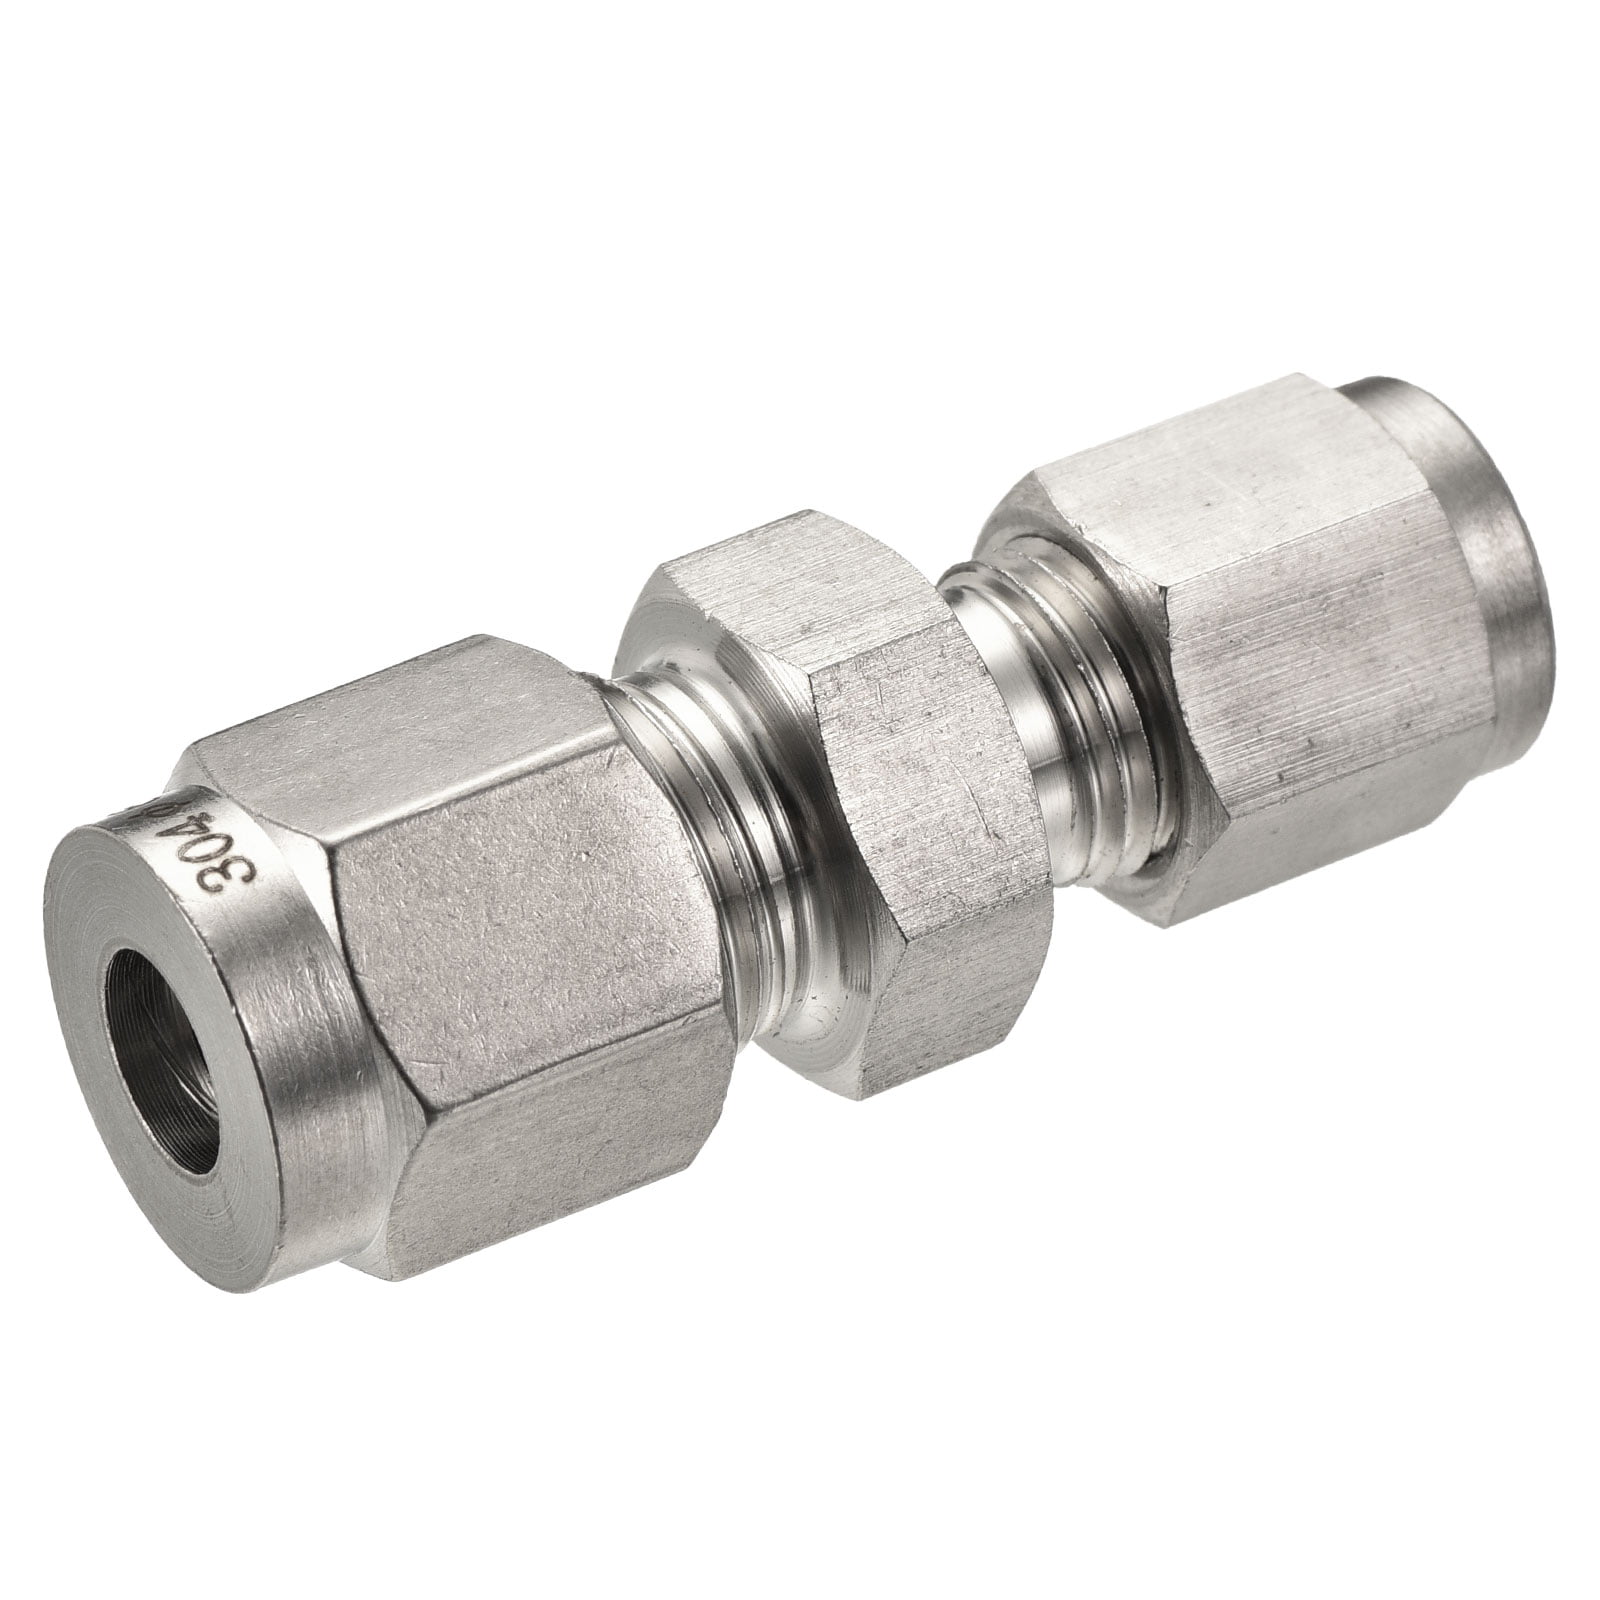 uxcell Brass Compression Tube Fitting 6mm OD Straight Pipe Adapter for Water Garden Irrigation System 